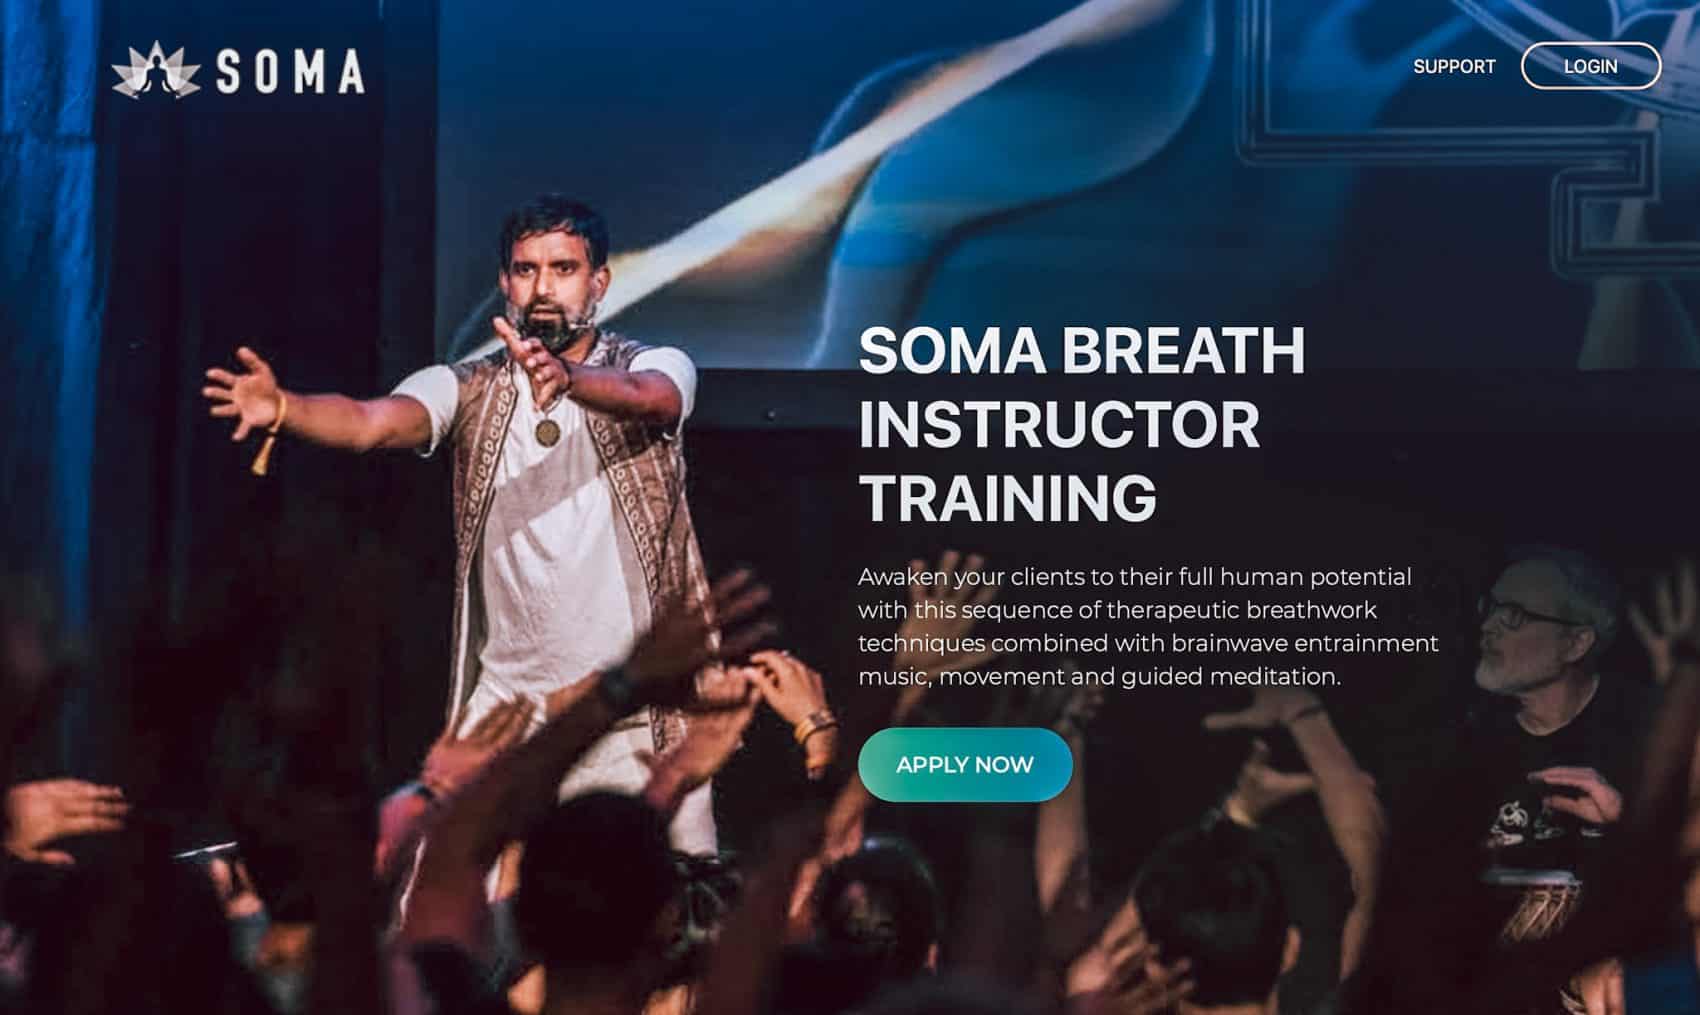 Indian man speaking on stage in public holding arms forward  best Yoga Instructor Courses Online YTT Alliance certified  Soma Breath